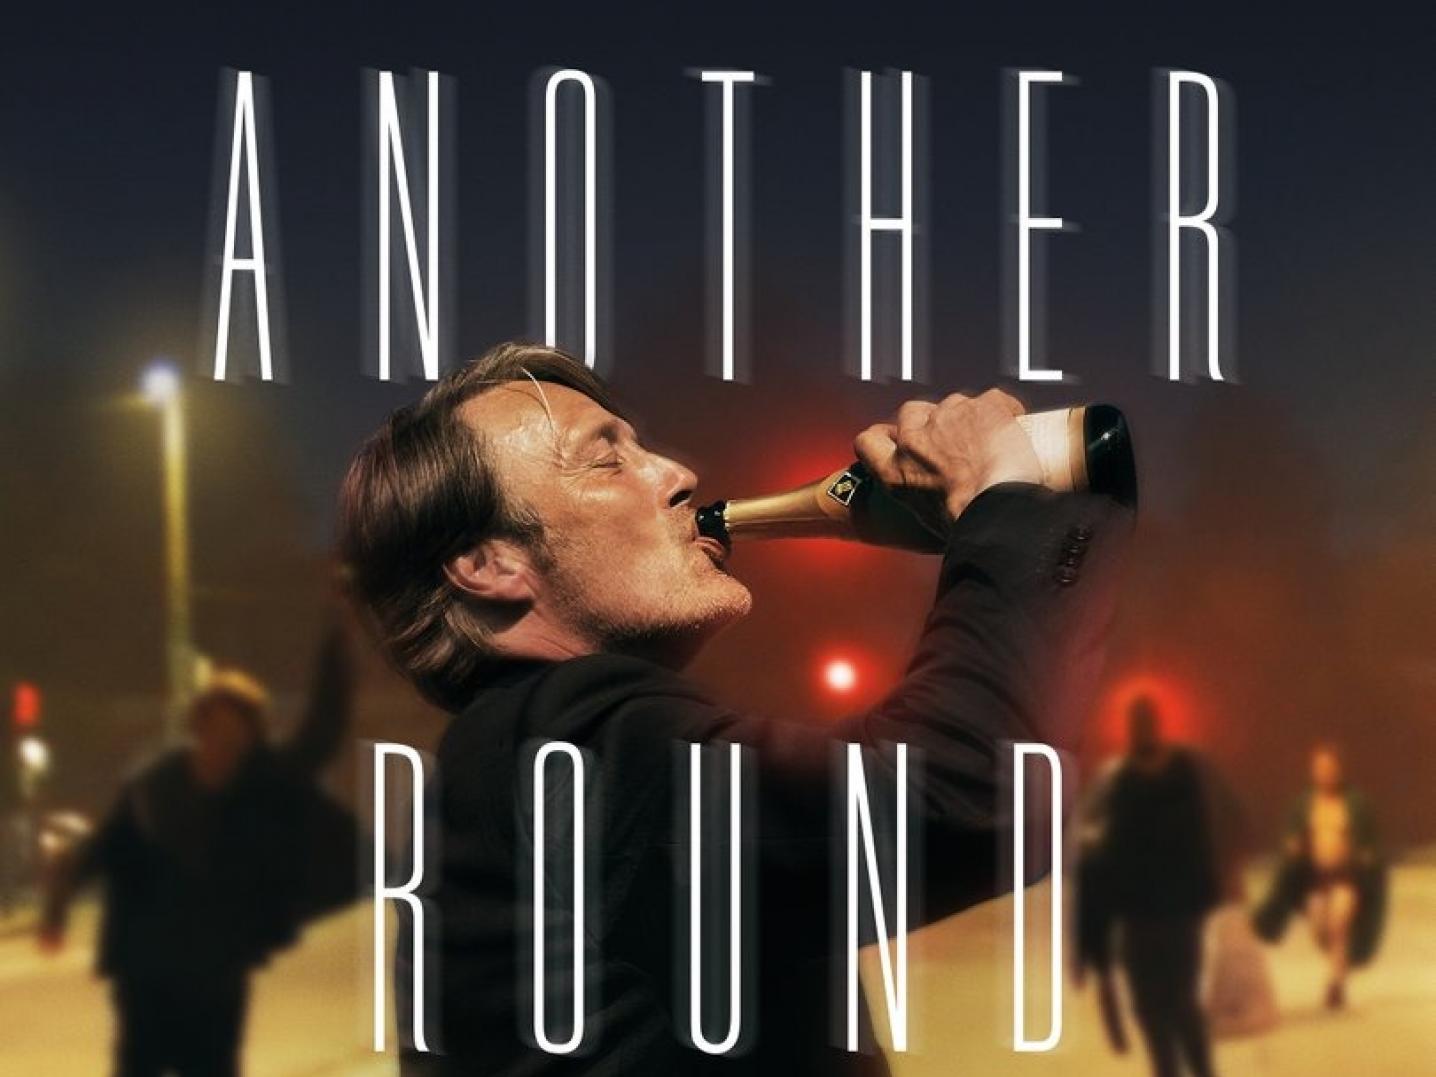 Poster for the Film "Another Round" by Thomas Vinterberg